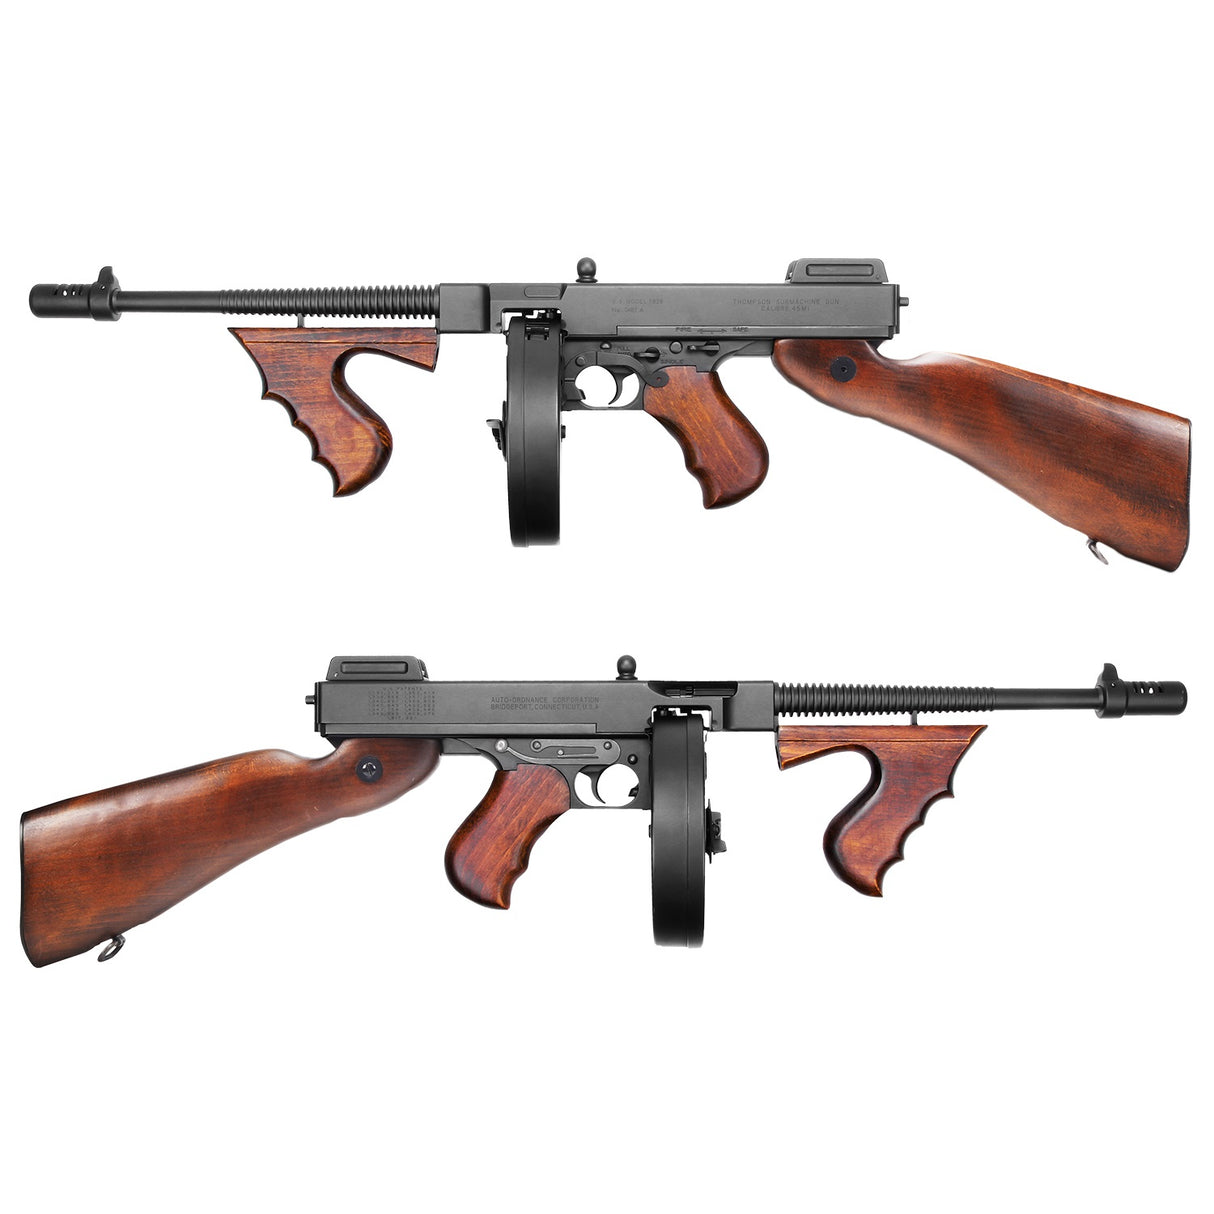 King Arms Thompson M1928 Chicago AEG Airsoft - Real Wood ( AG-258-WO )